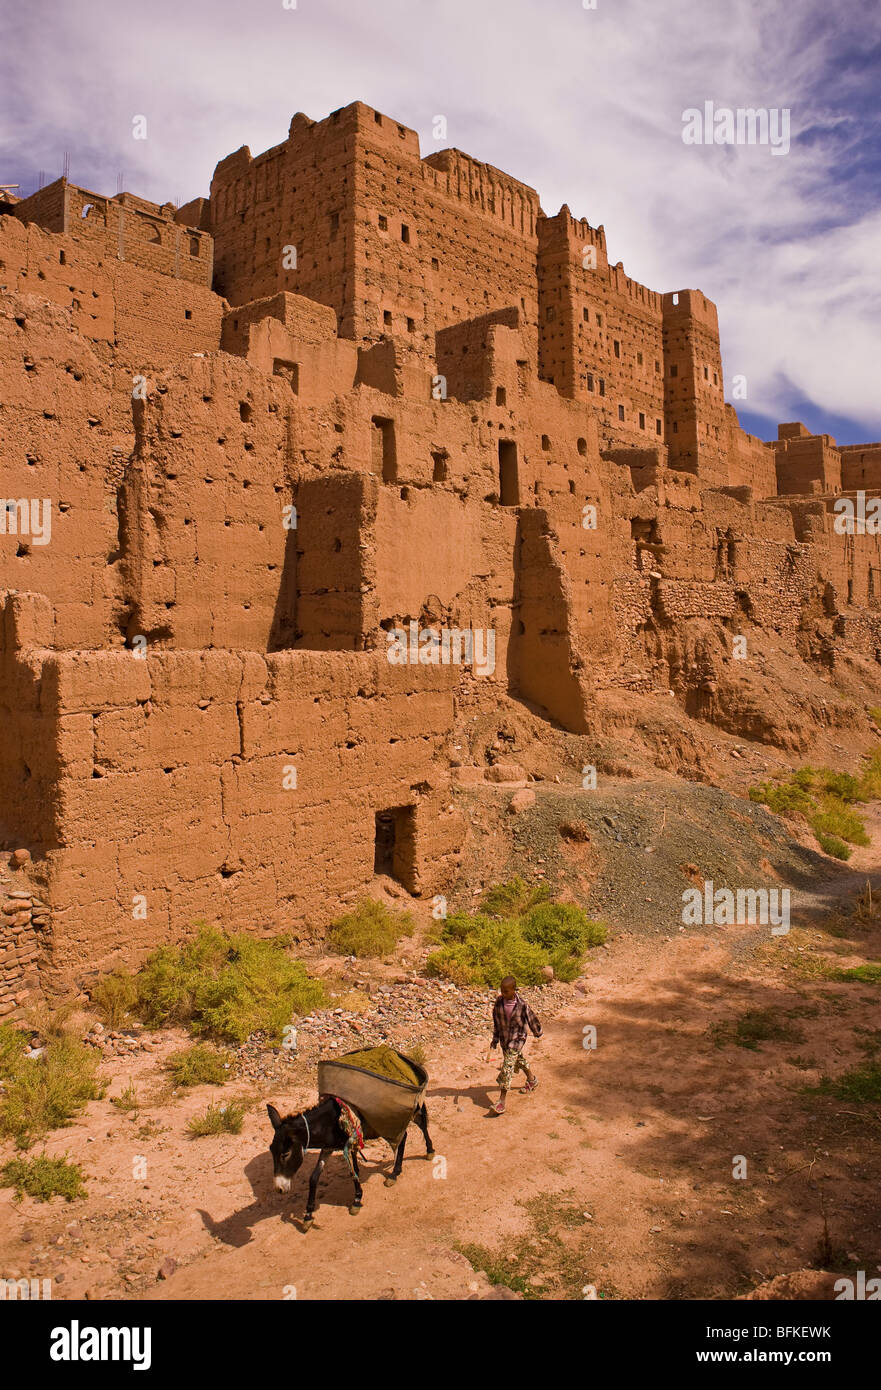 AGDZ, MOROCCO - Boy and donkey at Tamnougalt kasbah, in the Atlas Mountains. Stock Photo